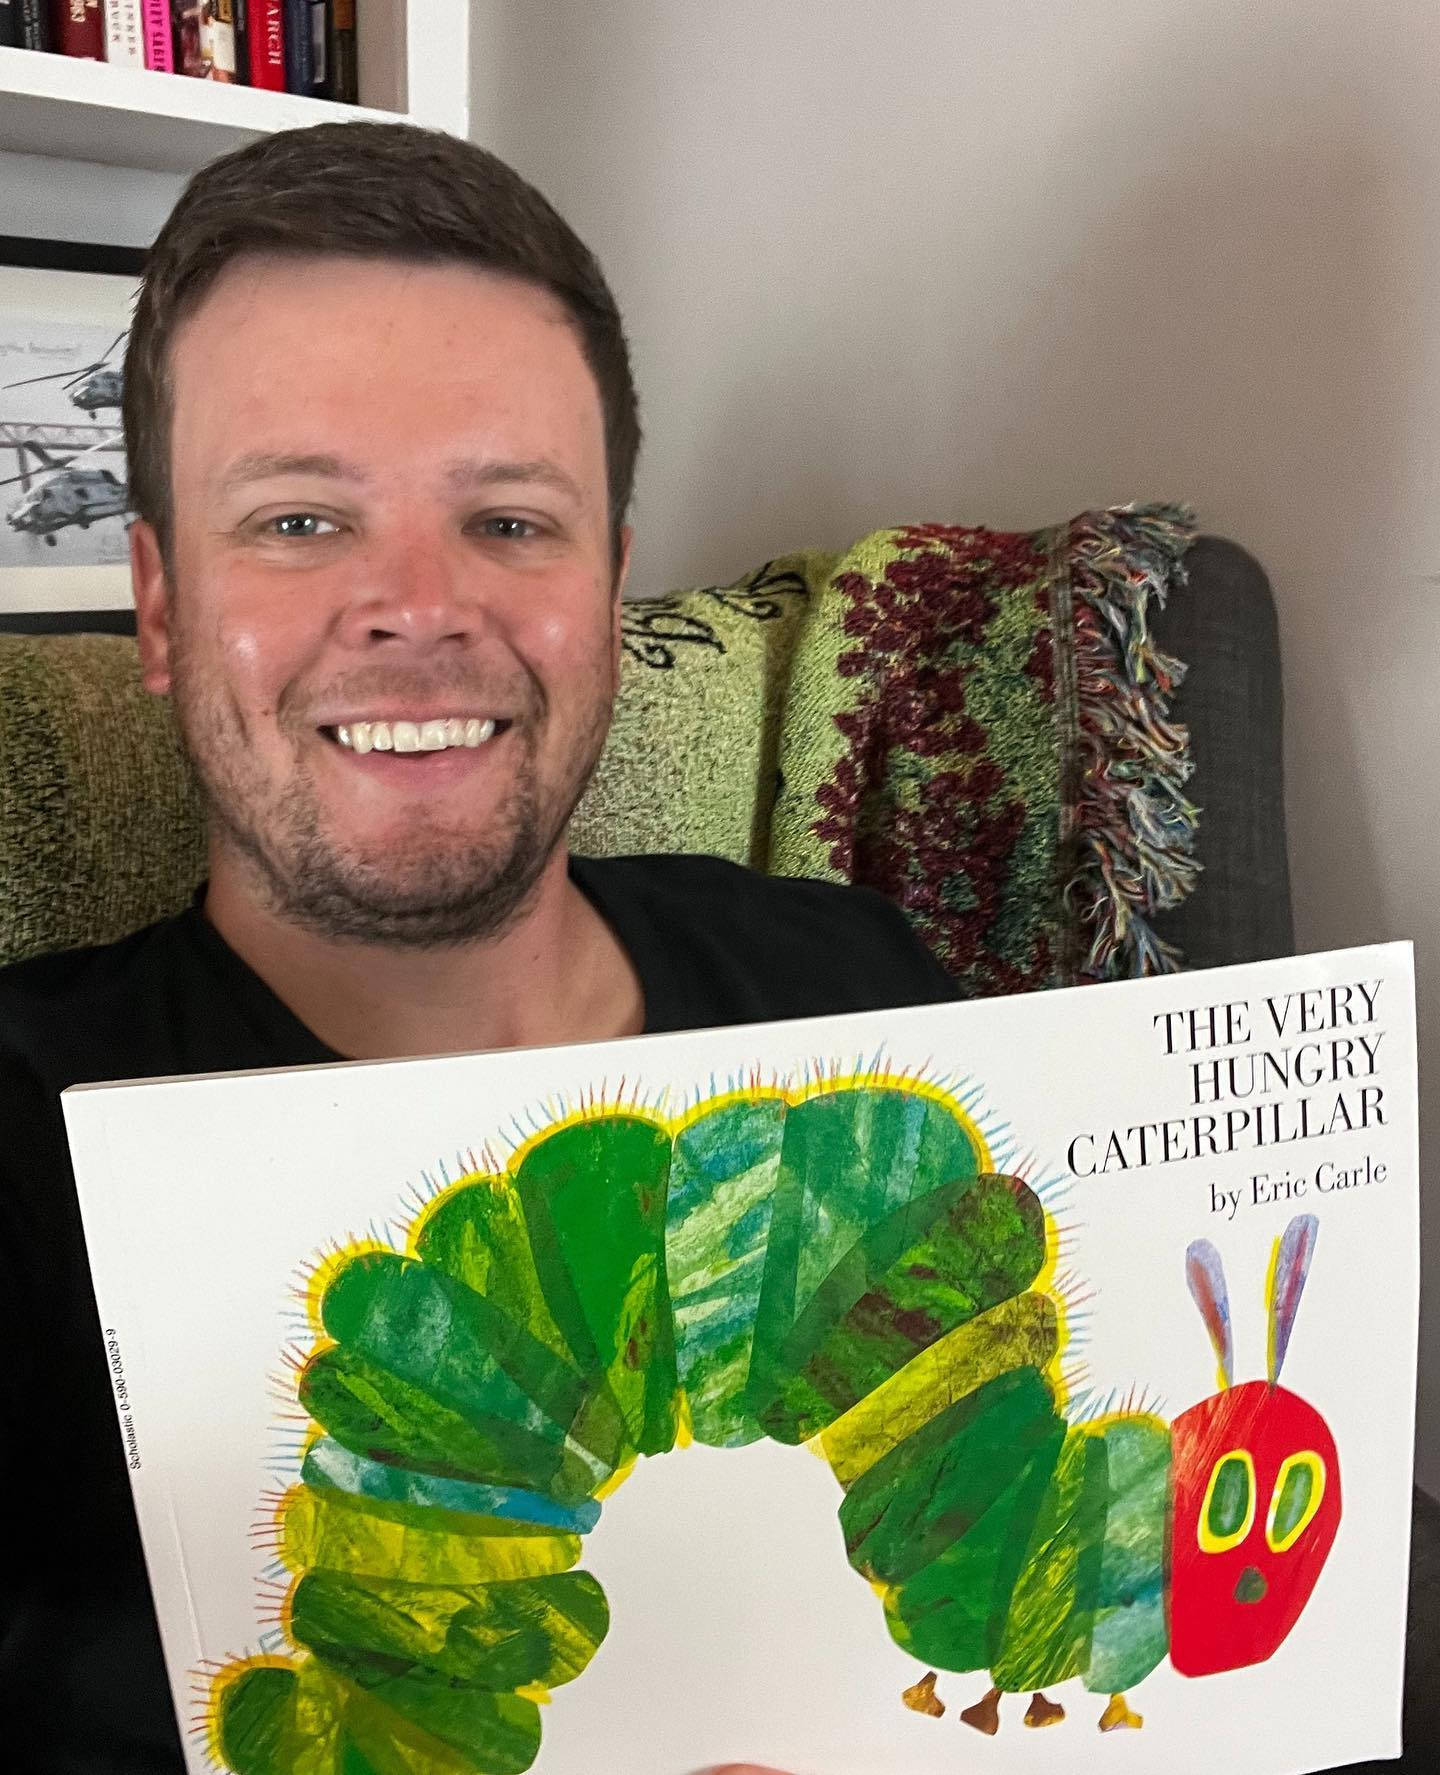 Erik Jones With A Book Entitled "the Very Hungry Caterpillar" Wallpaper